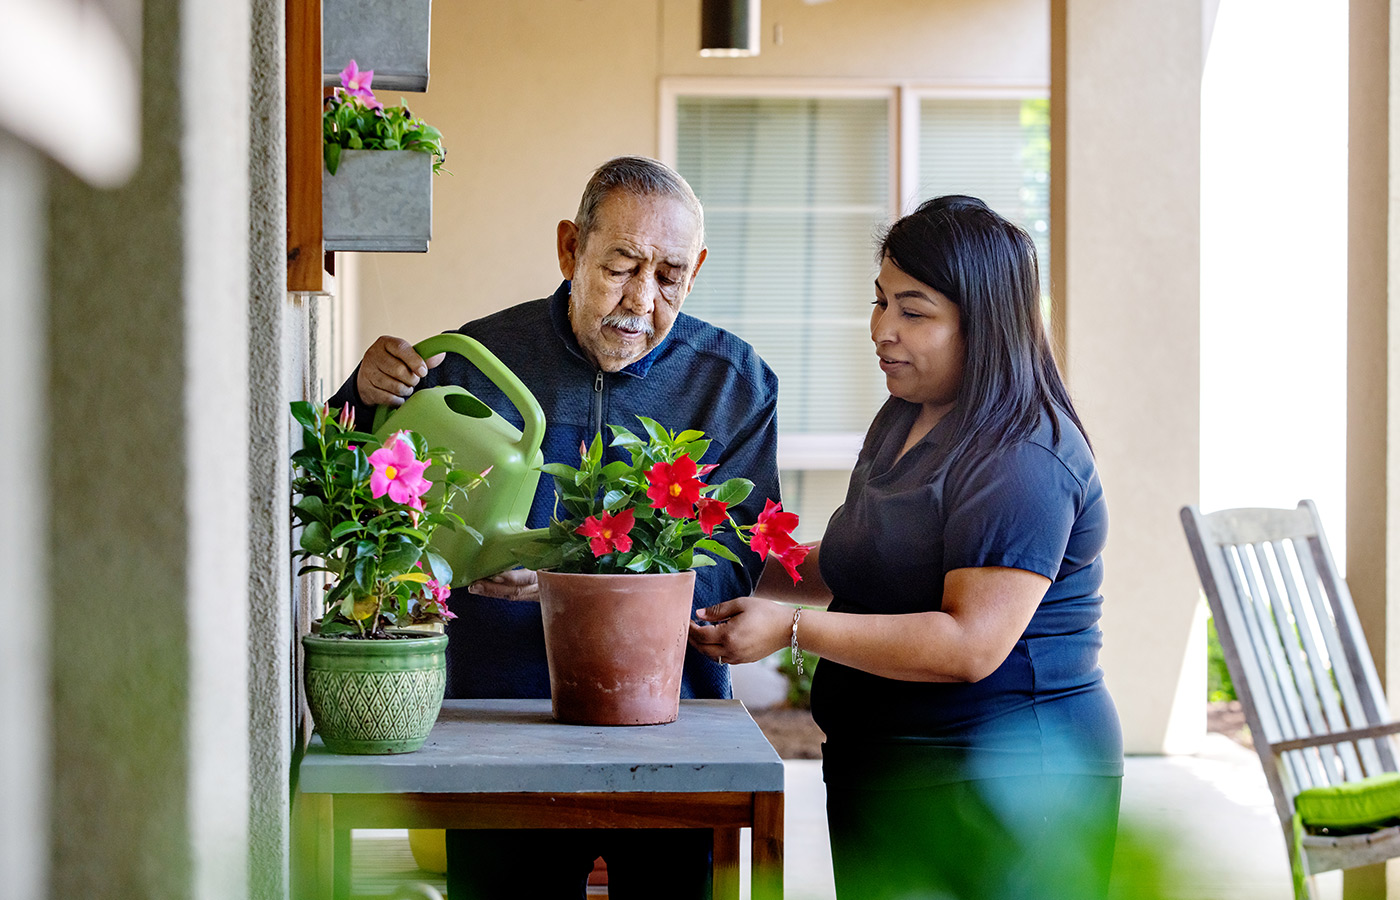 A naya caregiver helping a resident water plants.